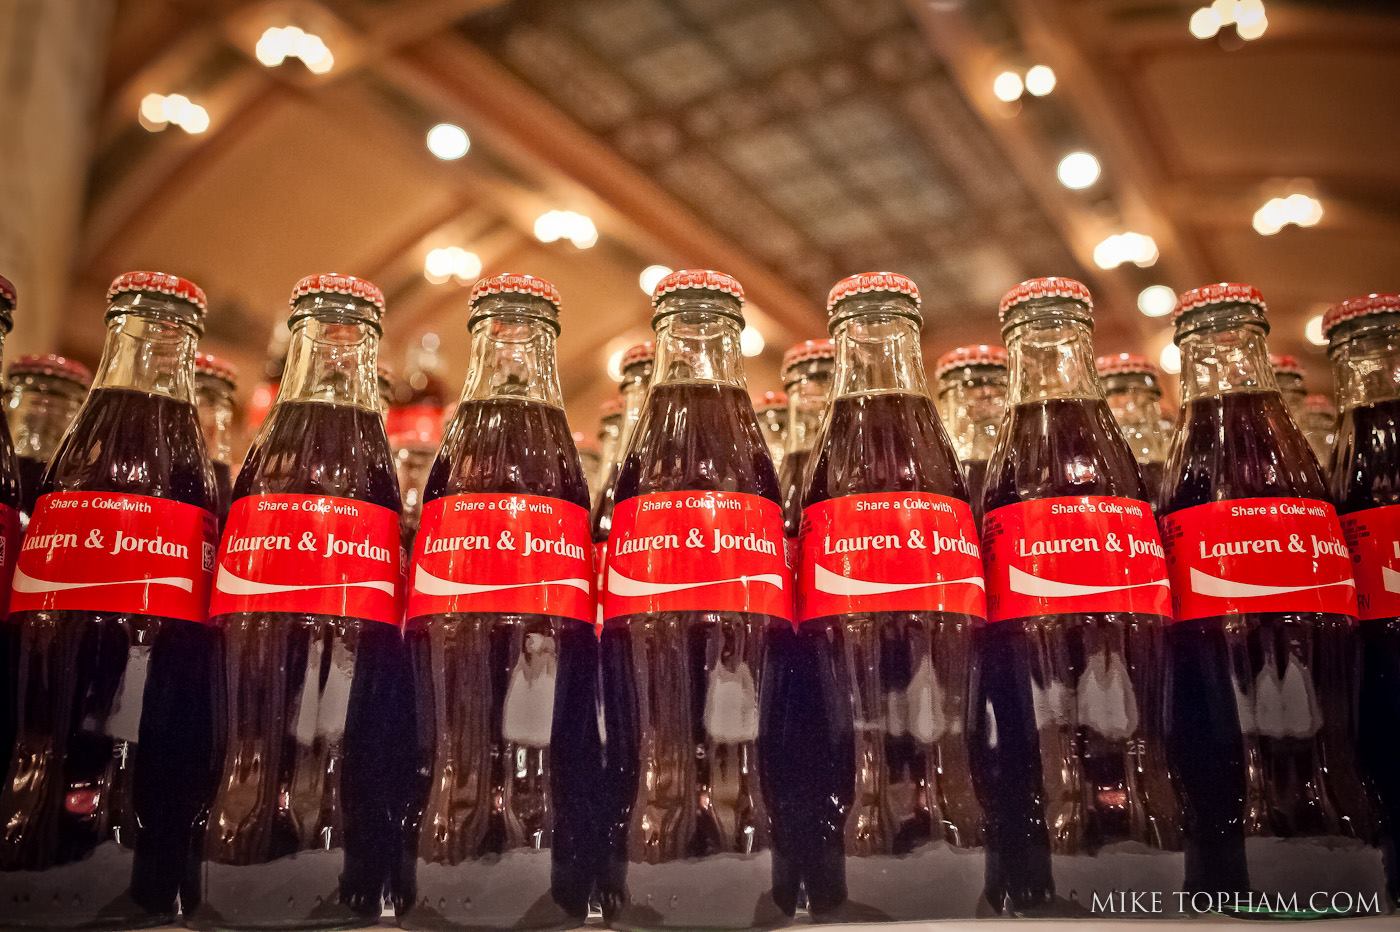 We loved their custom Coke bottles given to each guest at the end of the reception!